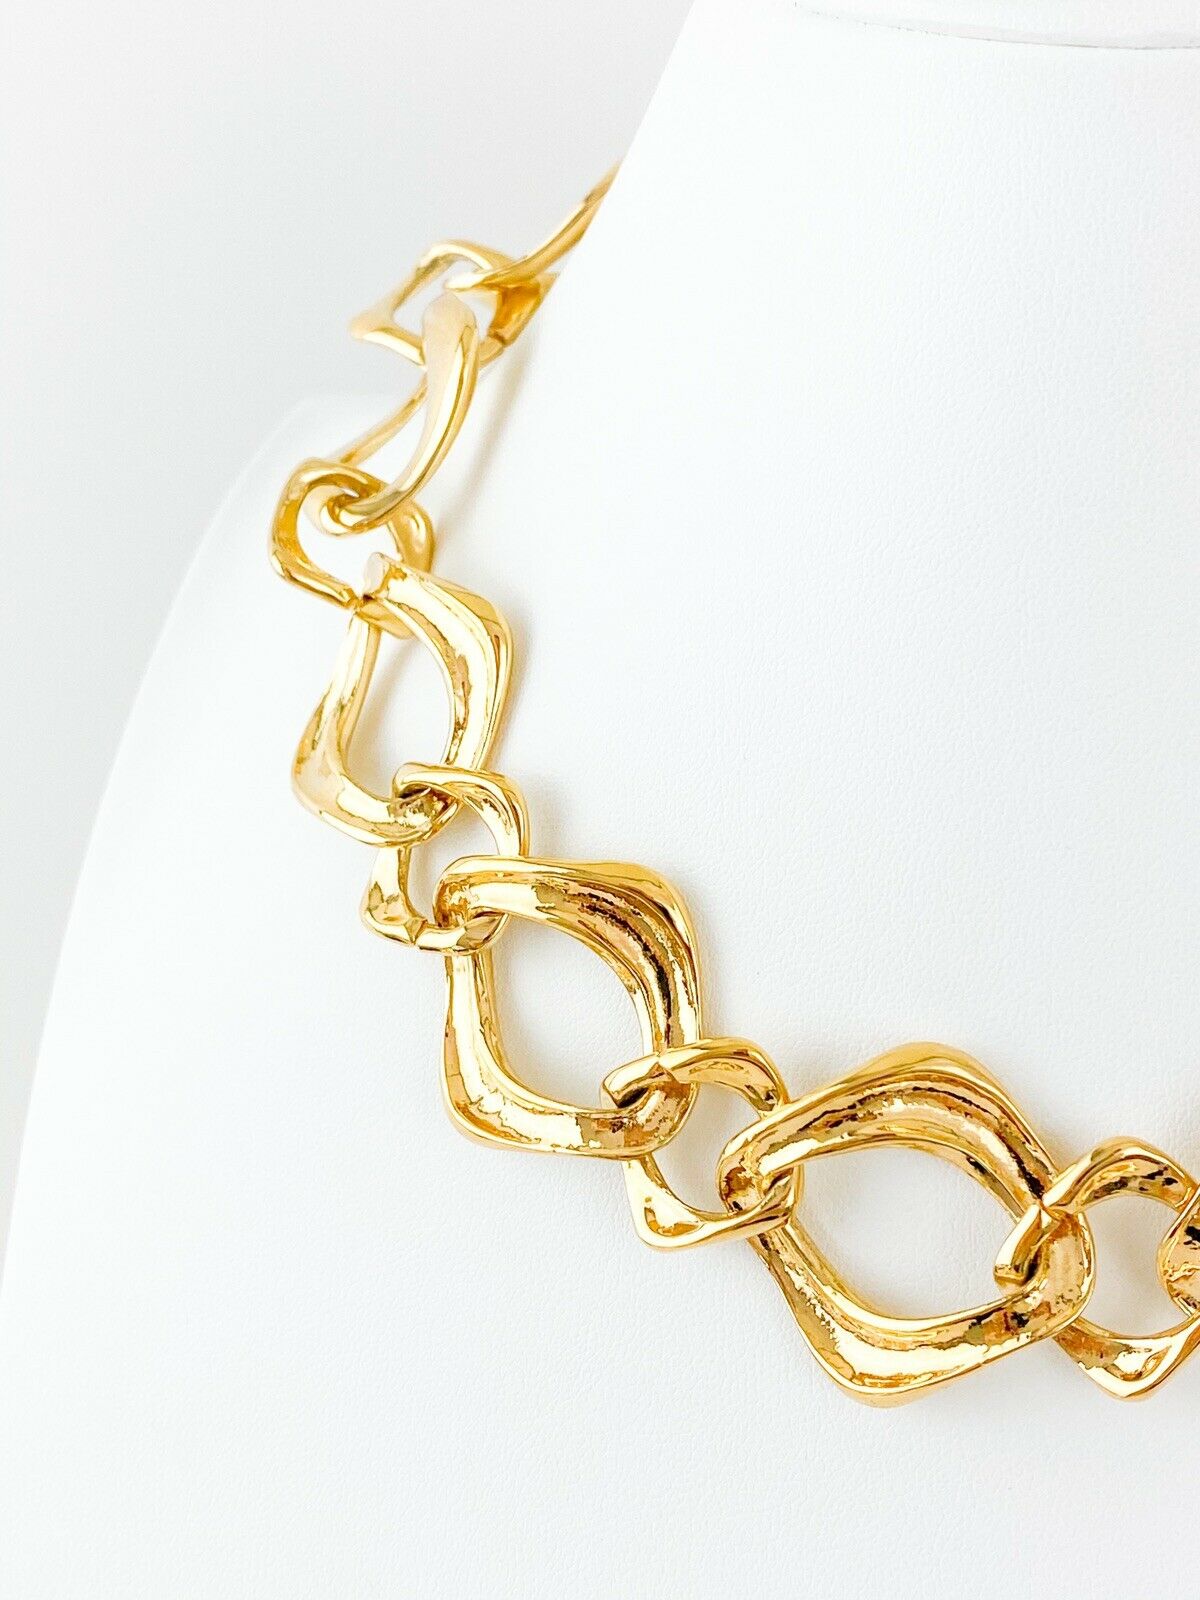 【SOLD OUT】YSL Yves Saint Laurent Vintage Chain Link Necklace Extra Large Beautiful